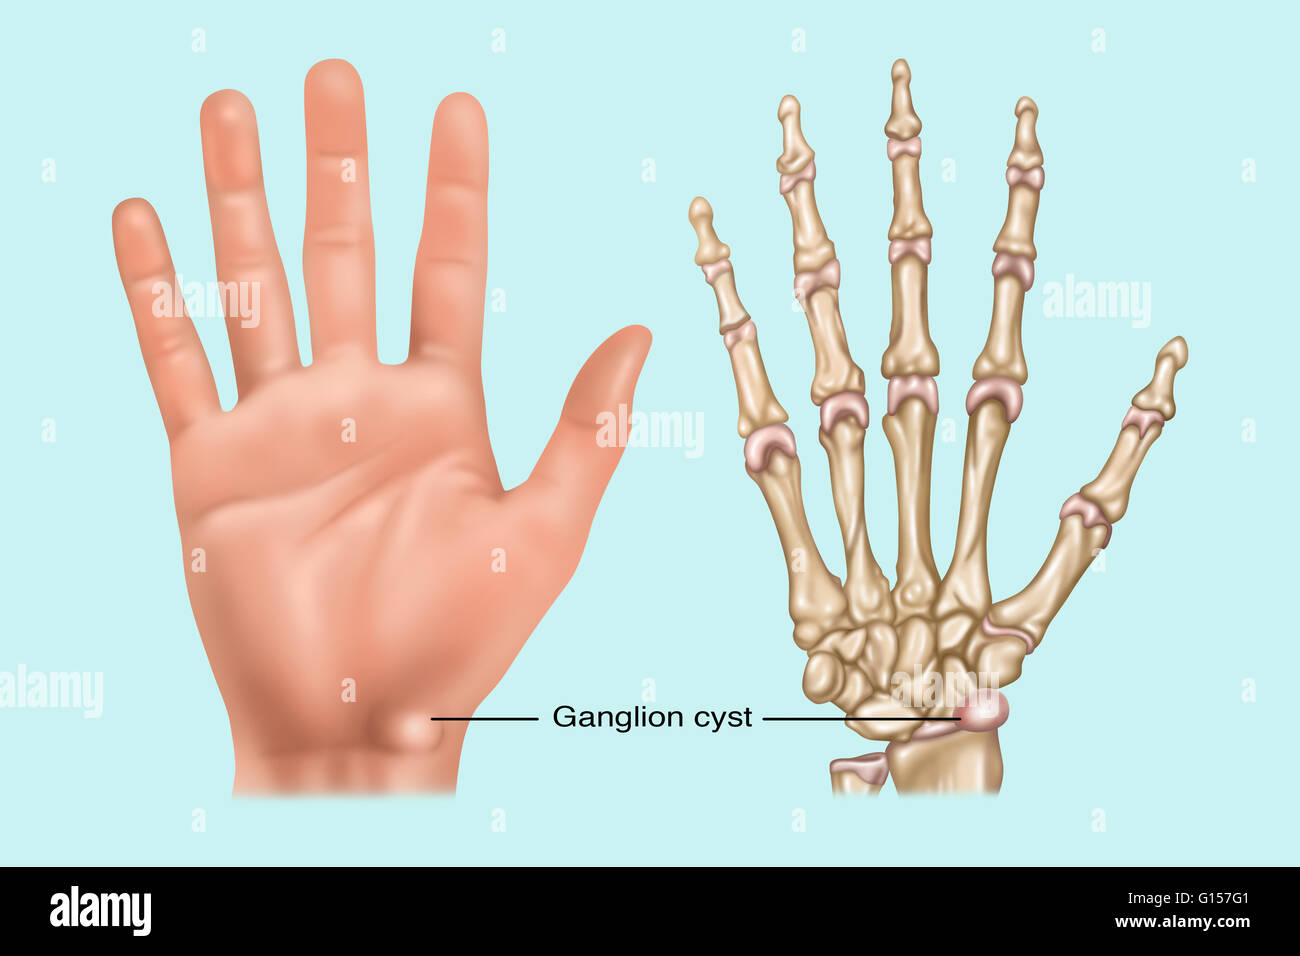 Illustration showing a ganglion cyst (fluid filled sac) in the wrist. Shown both on the skin surface and on the bone. Stock Photo